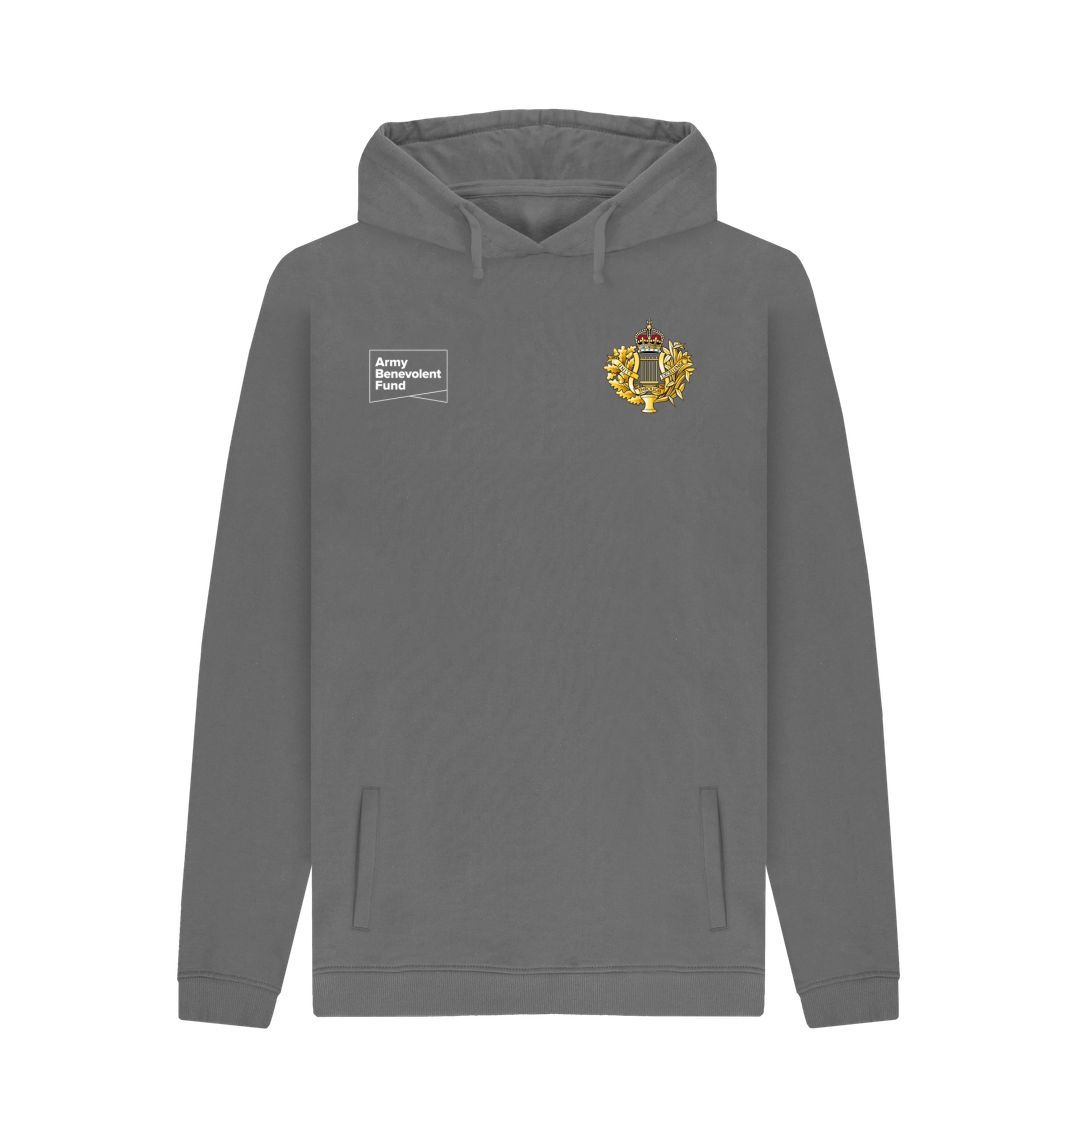 Corps of Army Music Unisex Hoodie - Army Benevolent Fund